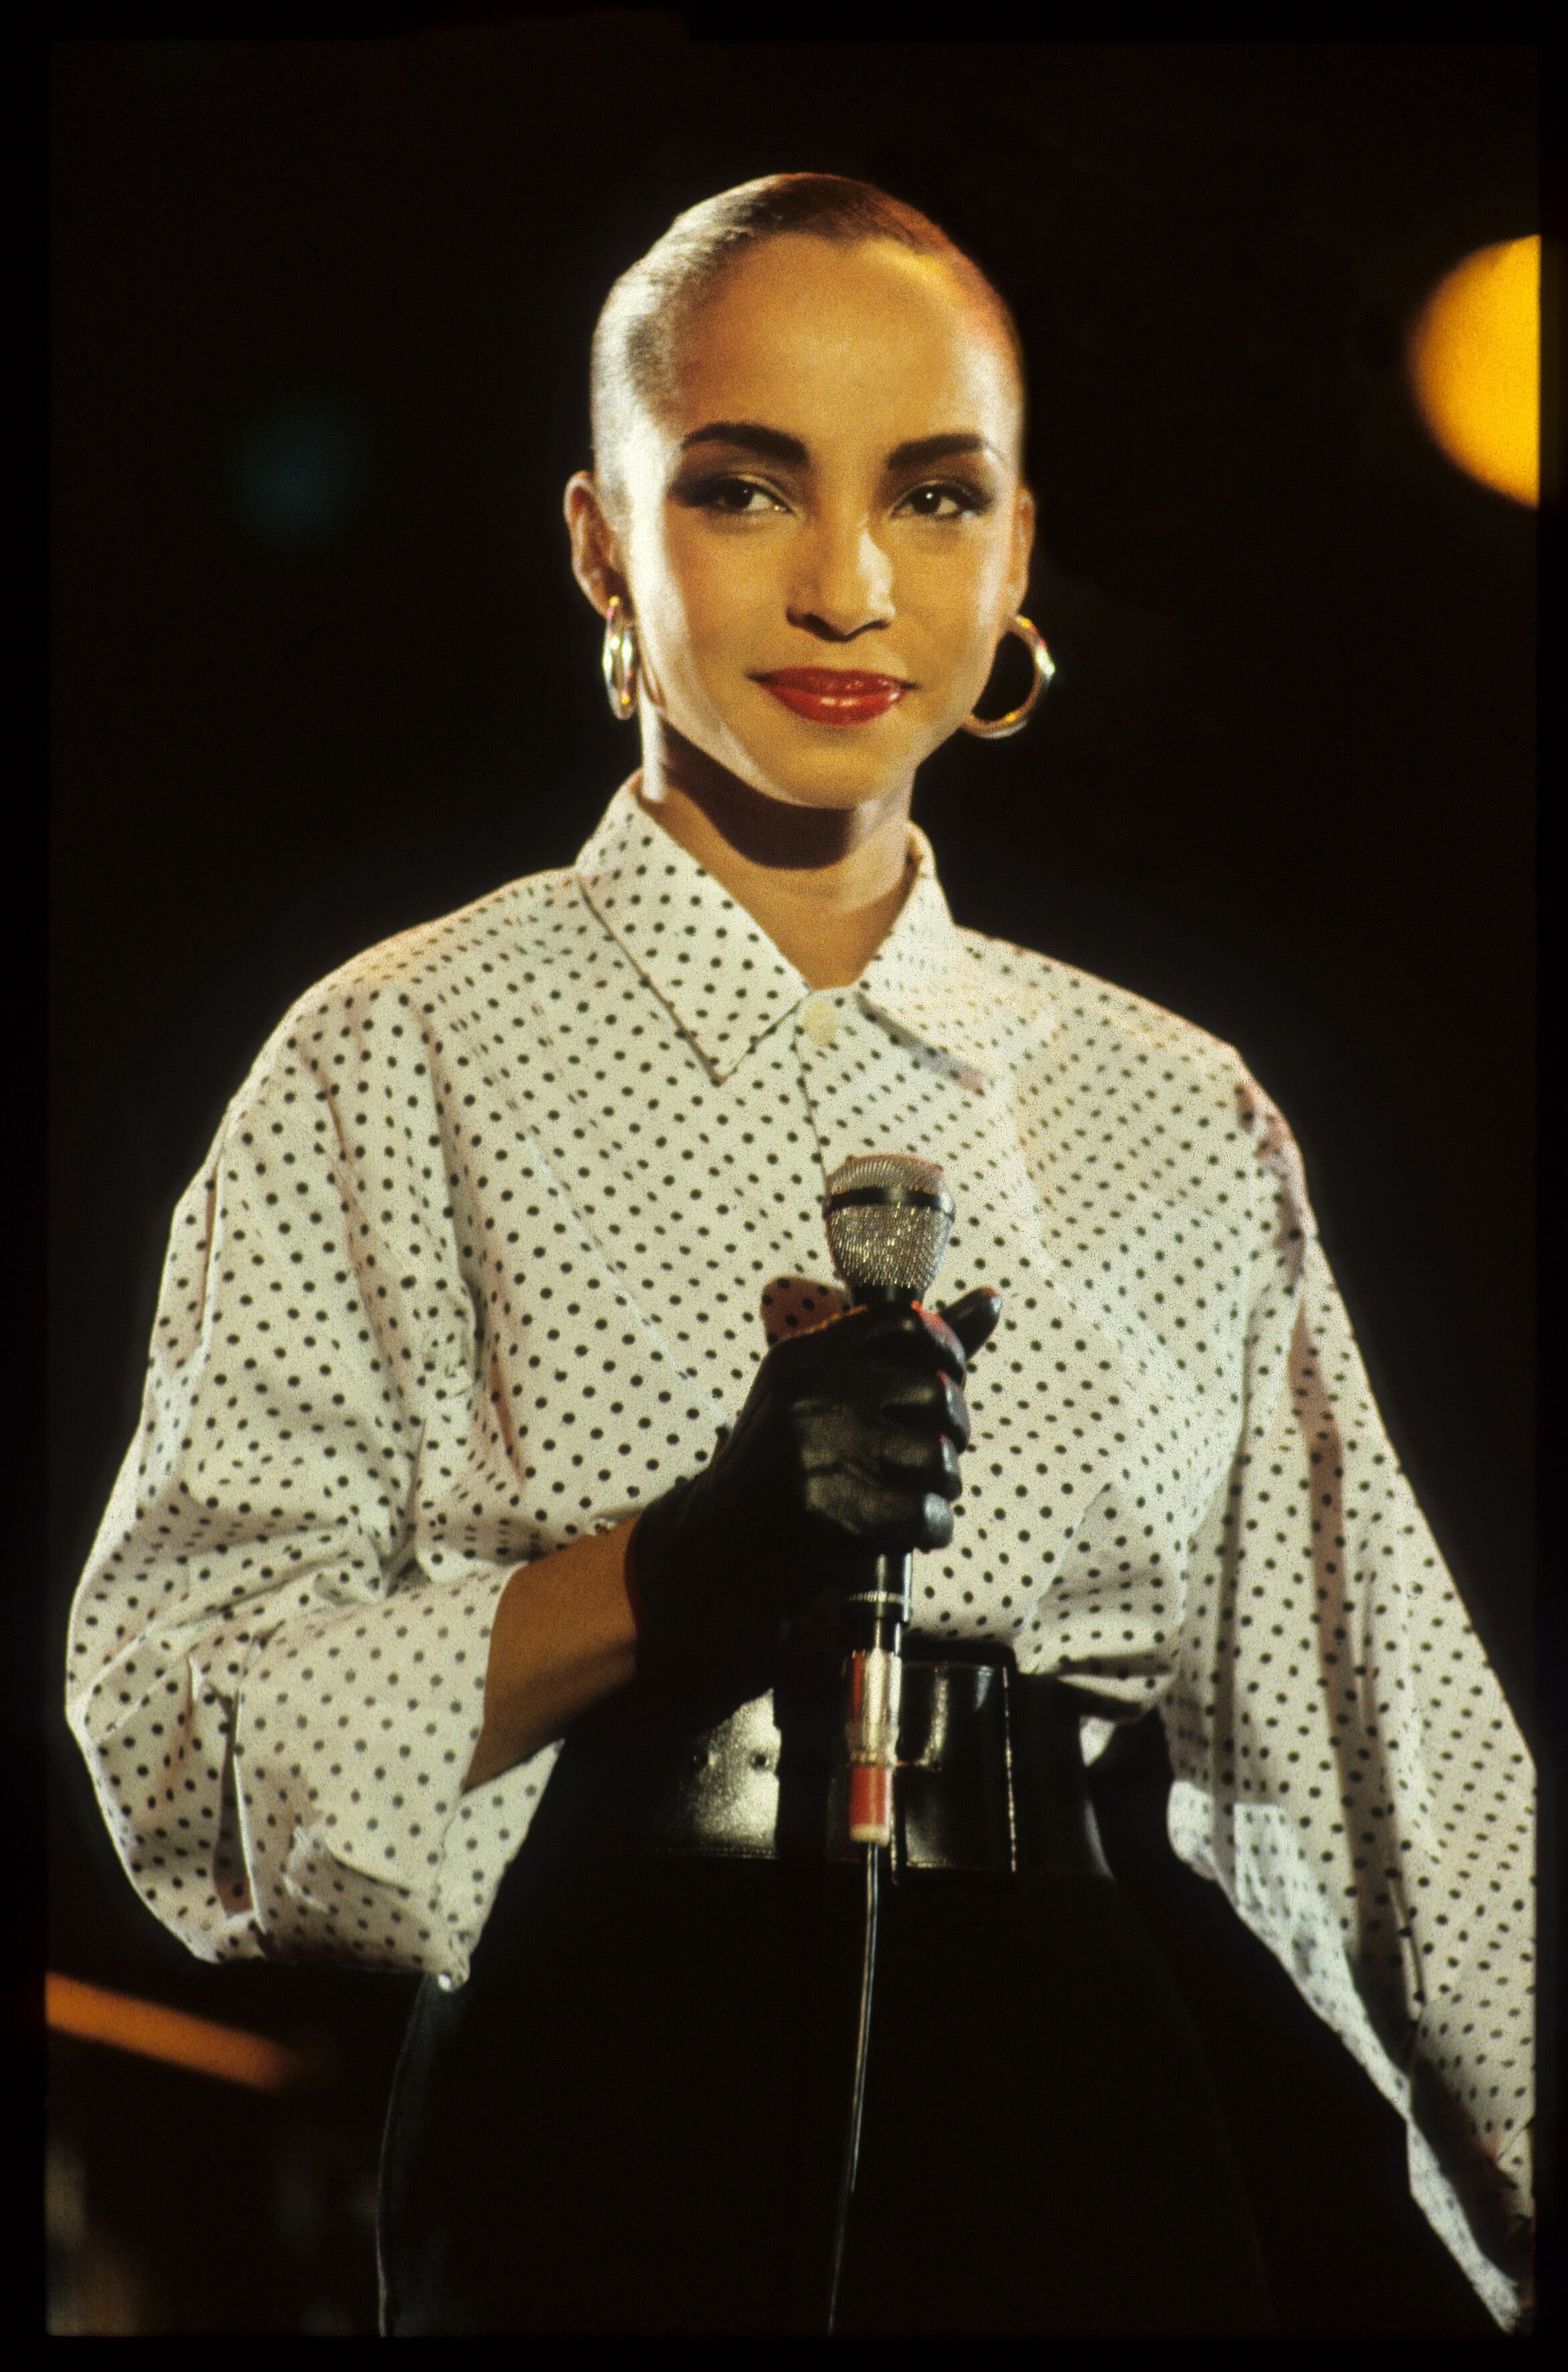 Sade performs on stage at Veronica Rocknight, Ahoy, Rotterdam, Netherlands, 21st September 1984 | Photo: Getty Images